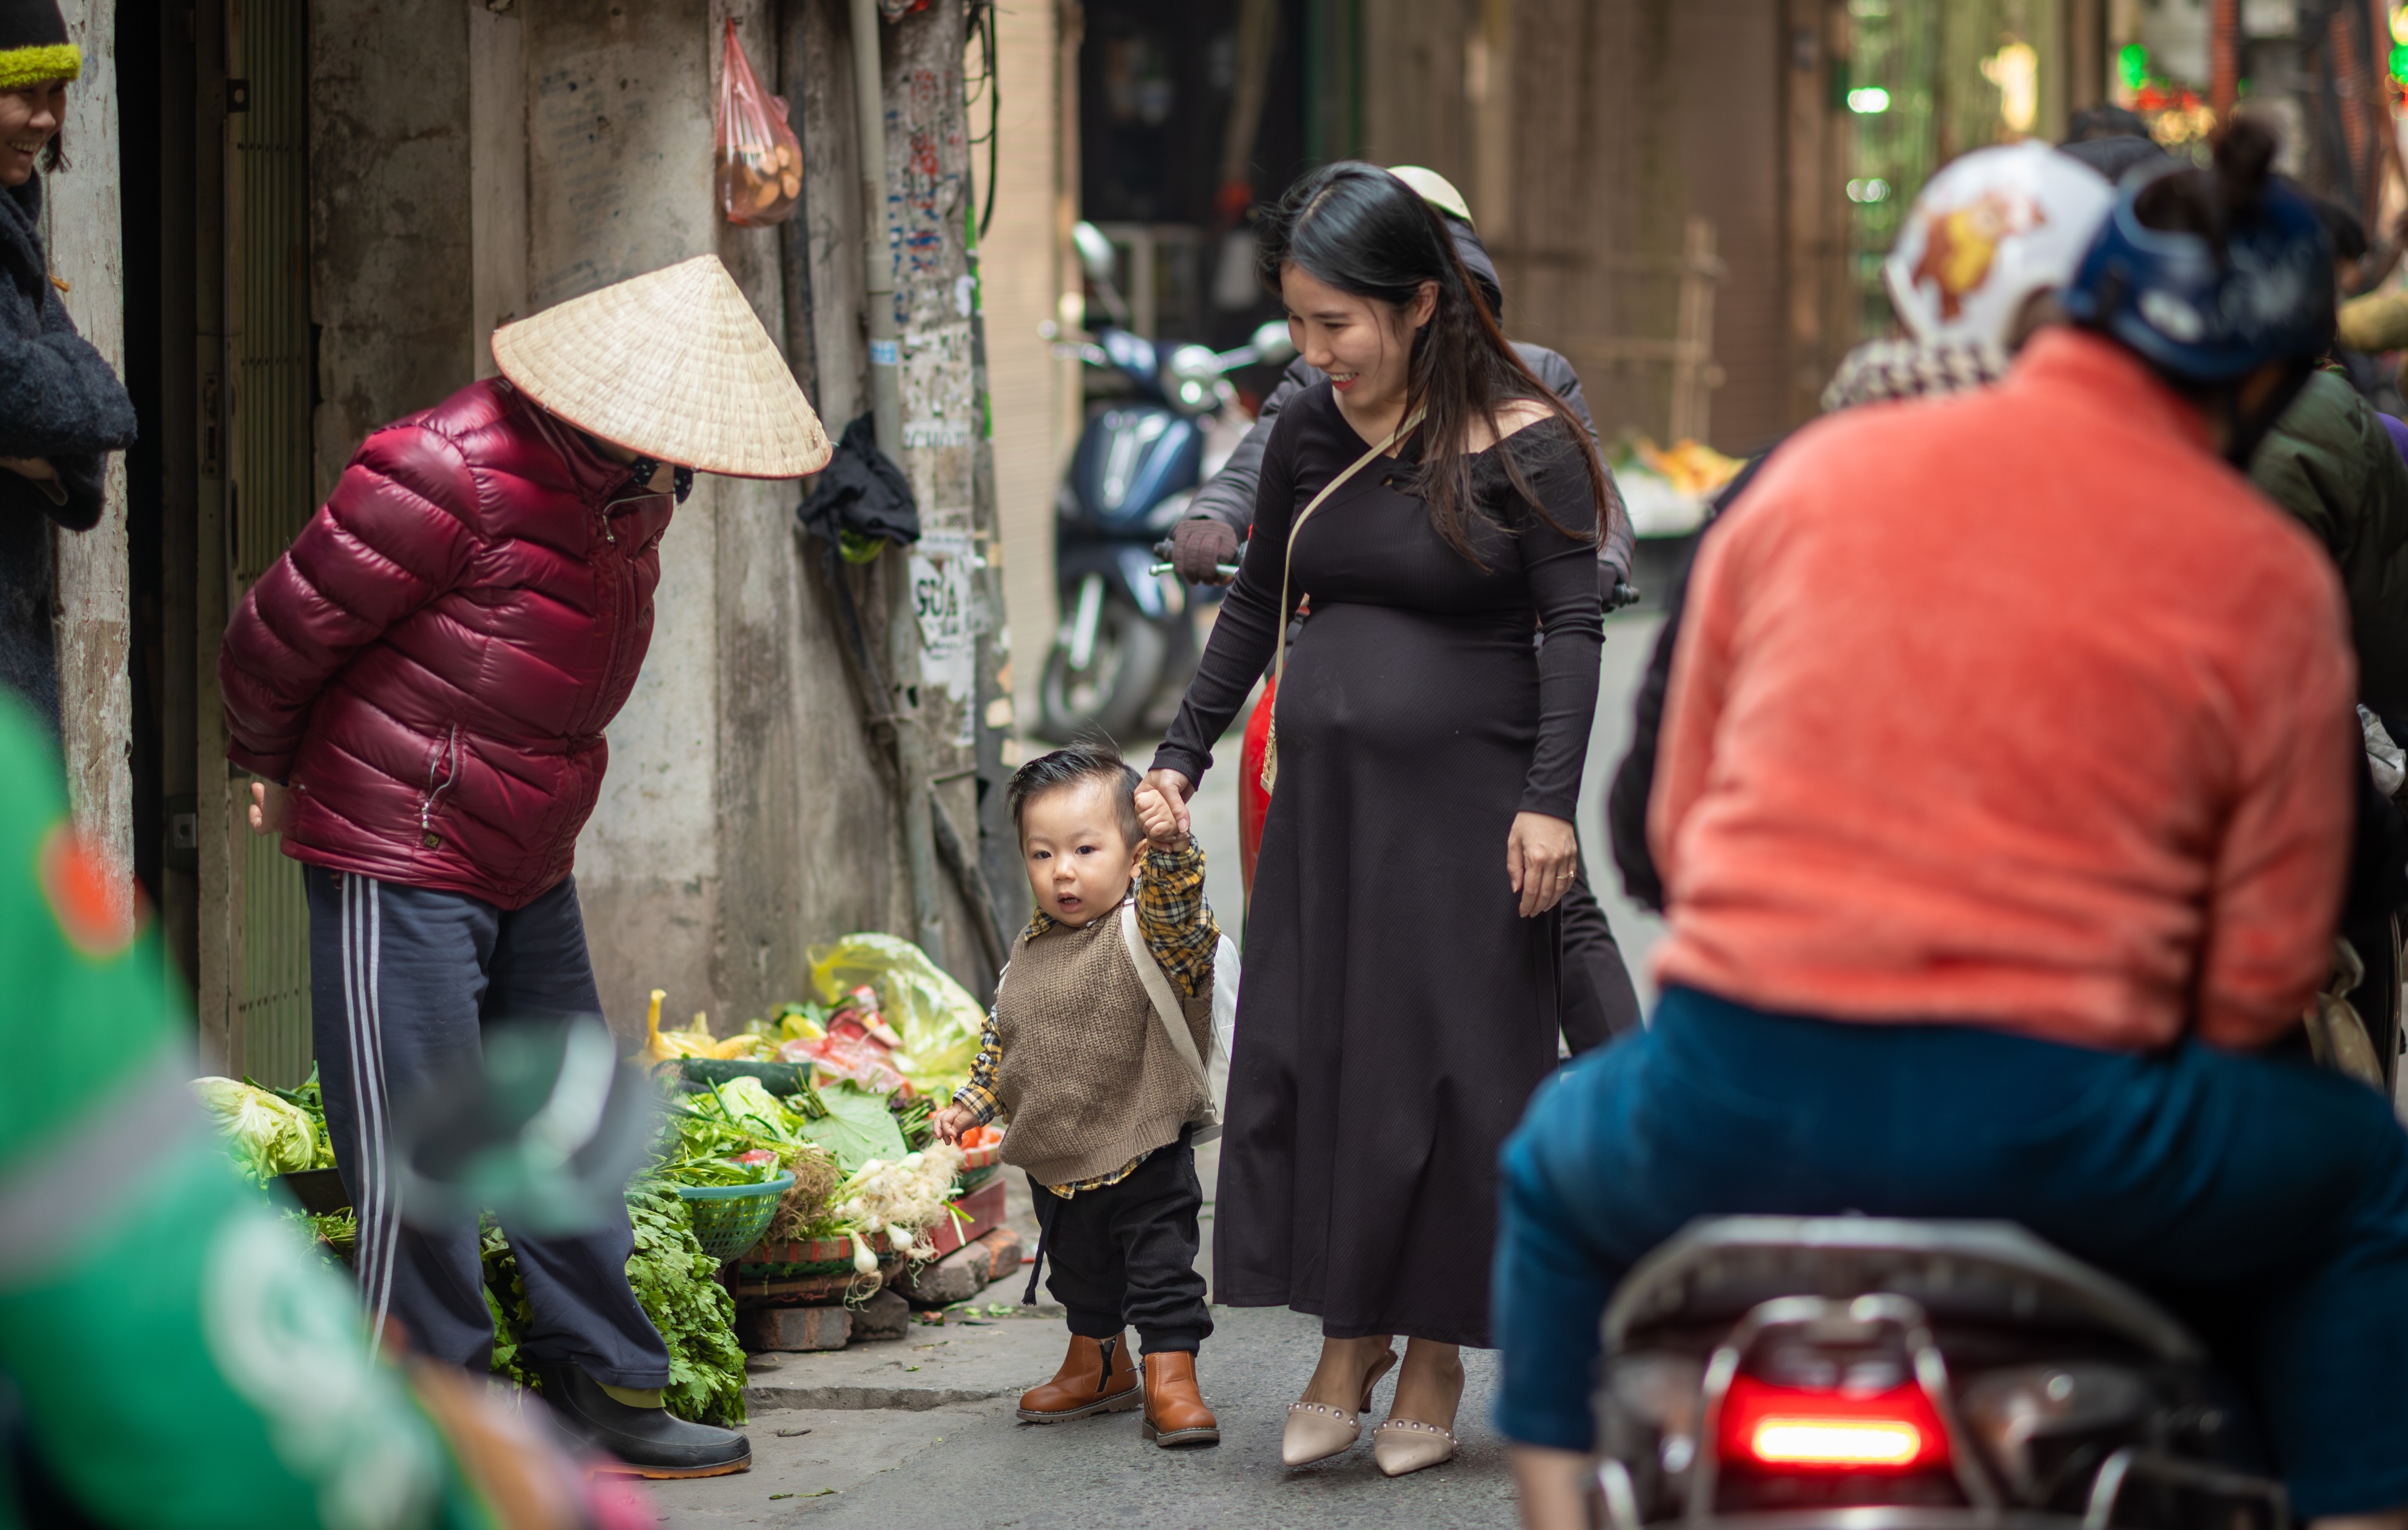 A pregnant woman walks with her young son in Hanoi. Vietnamese culture is still influenced by Confucianism and couples still tend to hope for sons. Photo: Shutterstock